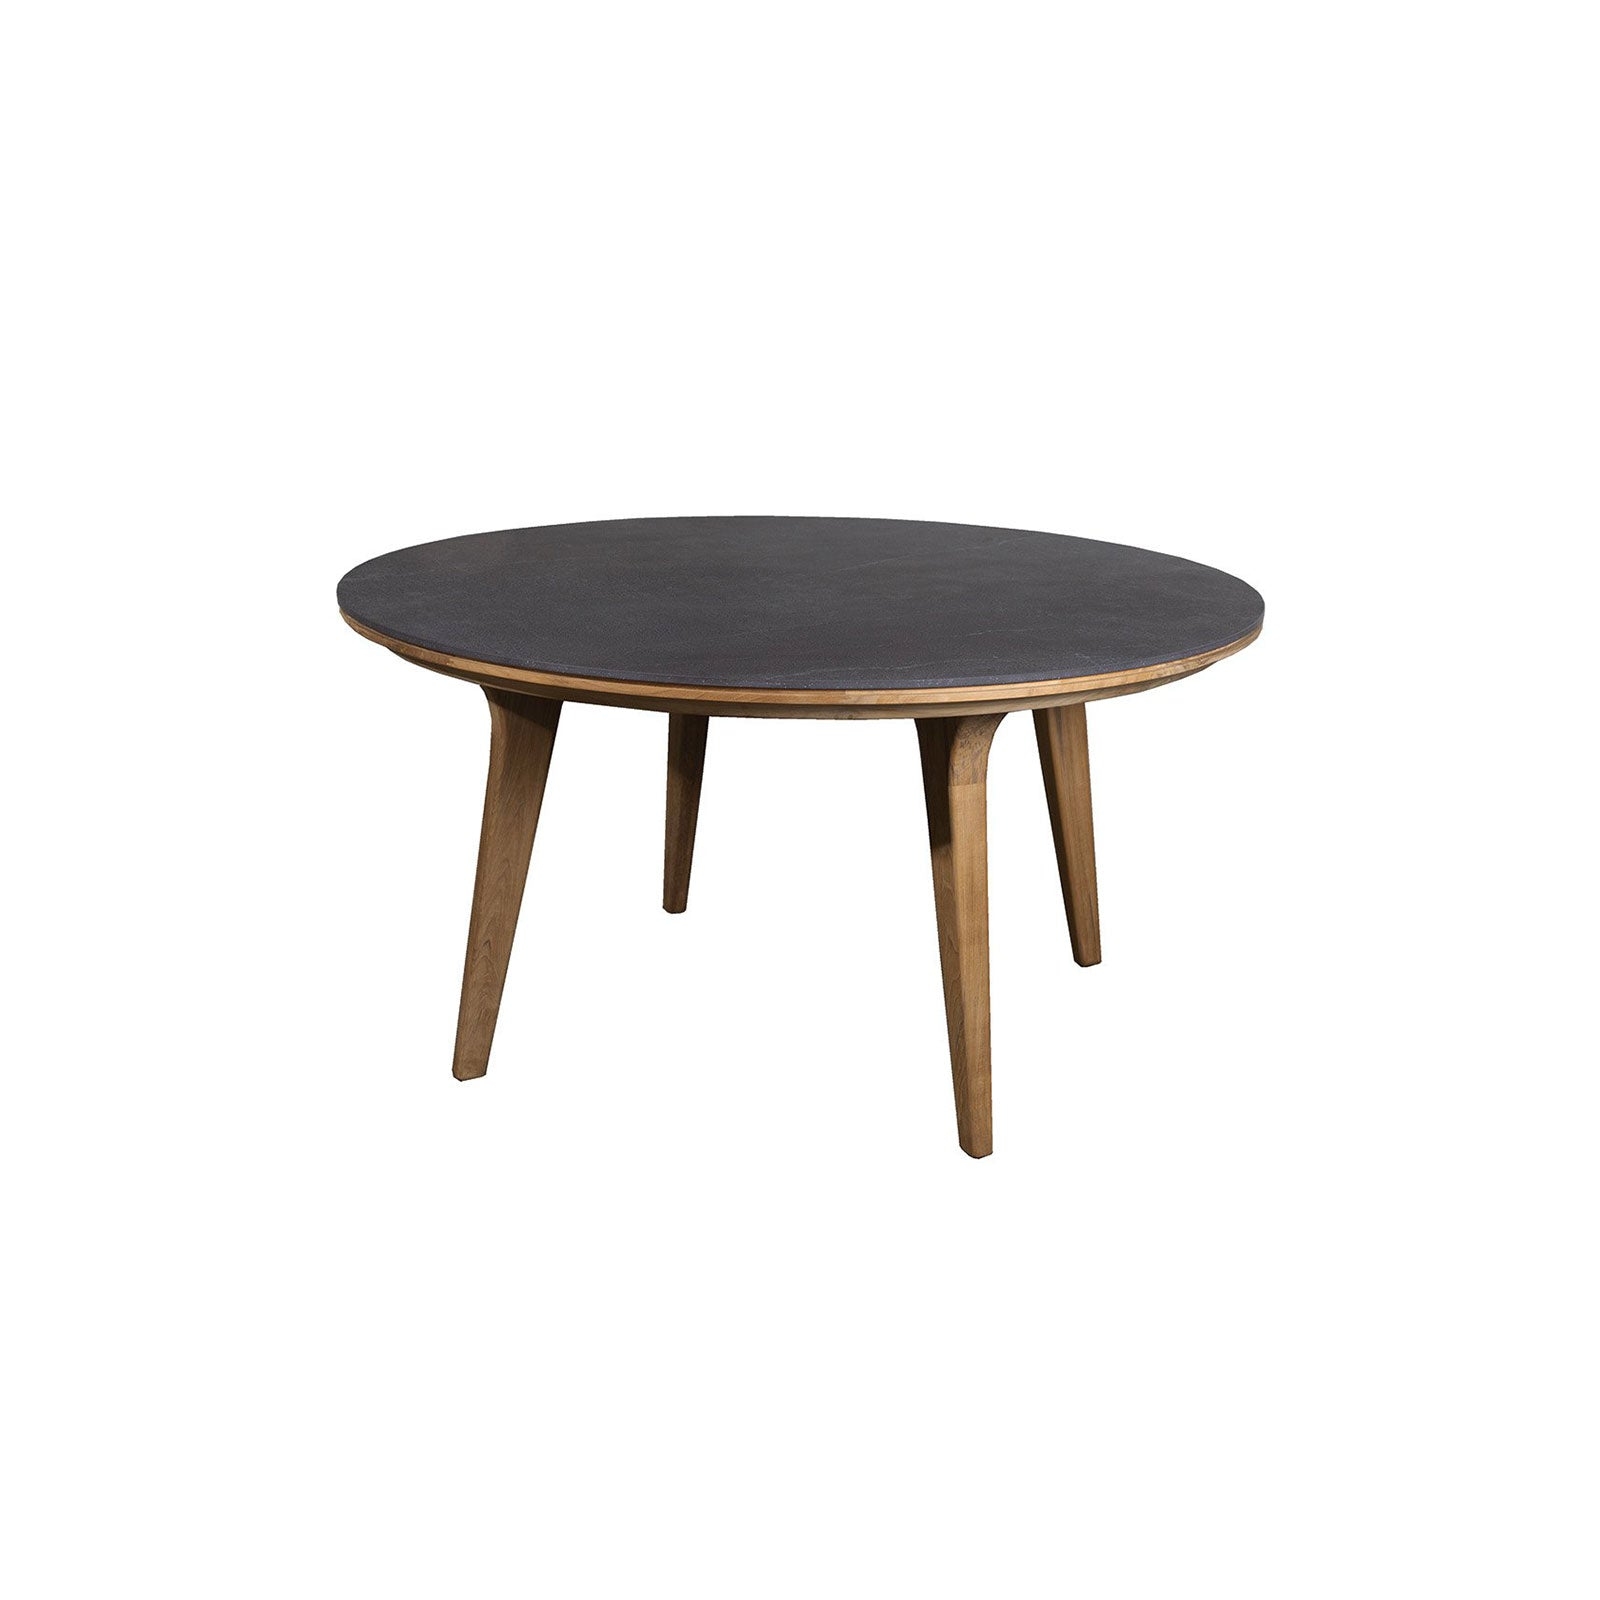 Aspect Table Round – Outdoor Table Fossil Ceramic Black – Cane Line – Indor